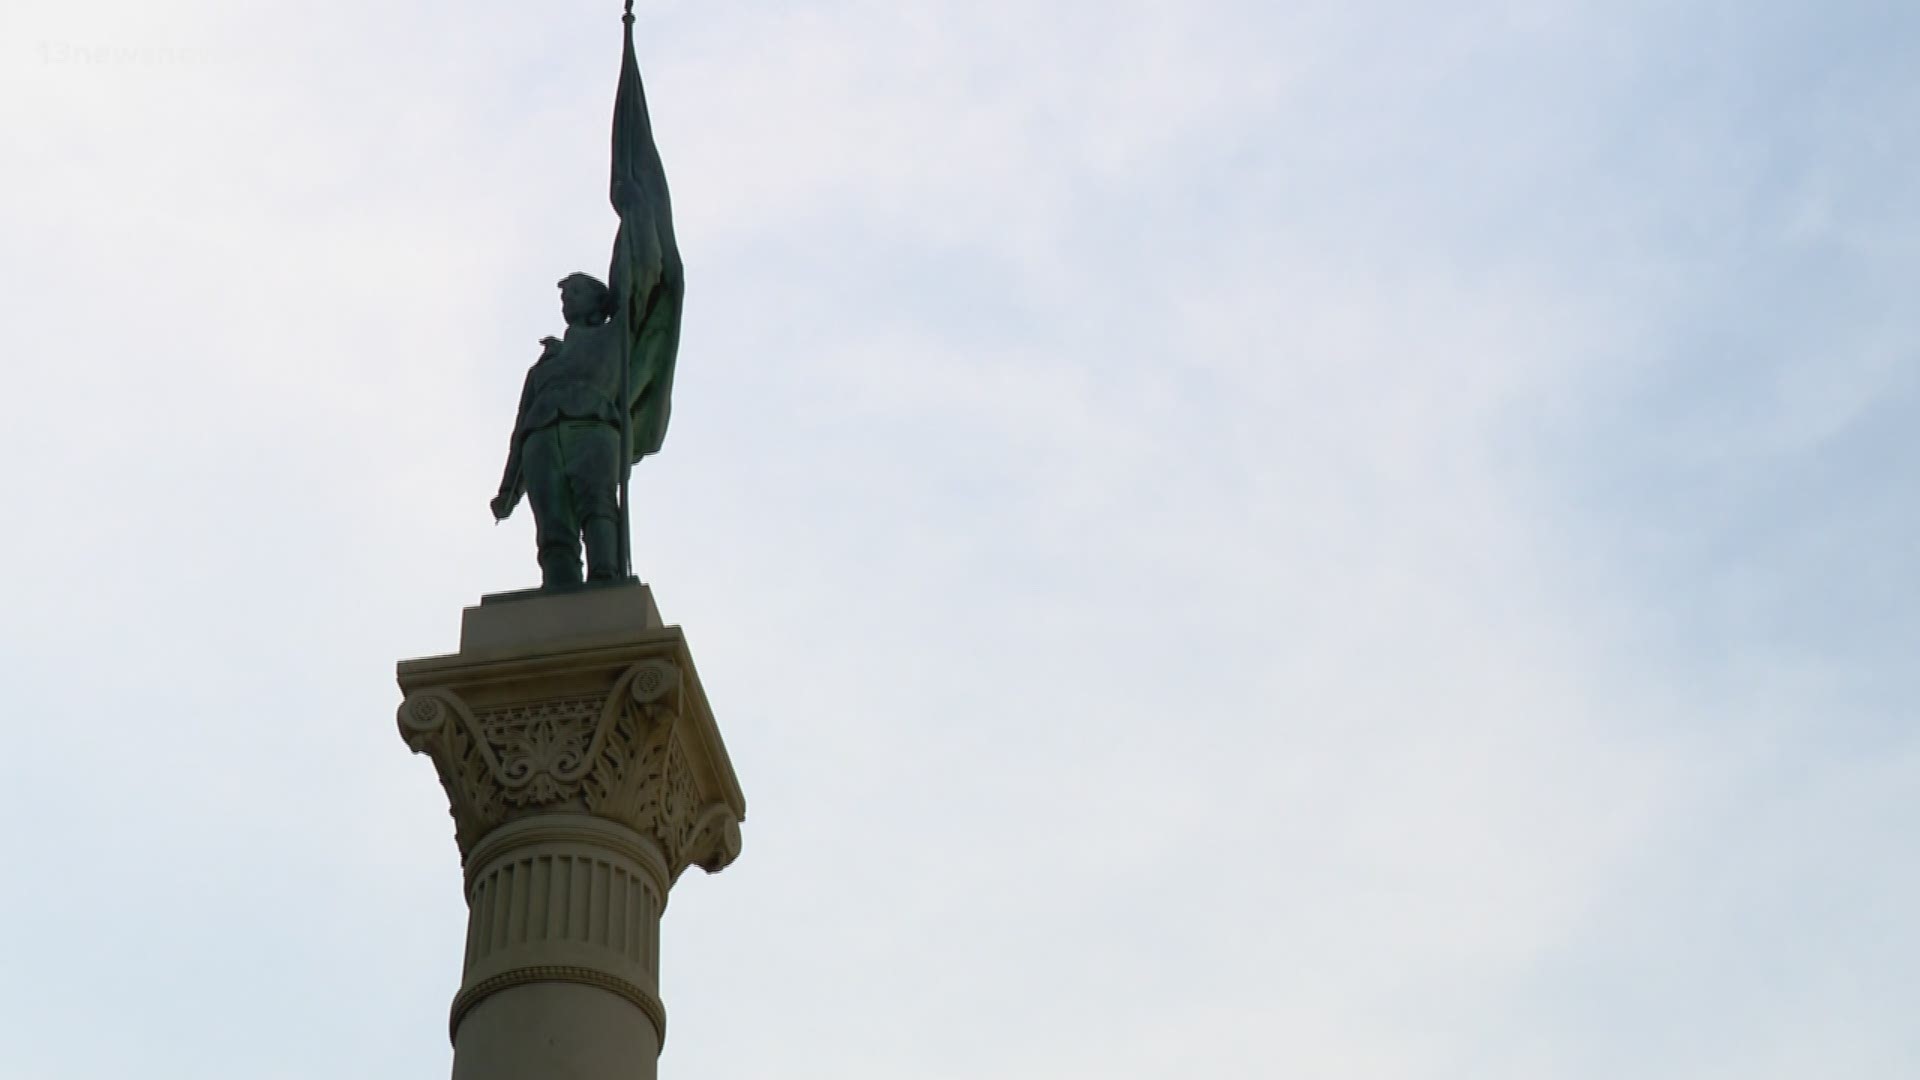 The city wants to remove the Confederate monument standing in downtown Norfolk, citing its "constitutional right to move [the monument] from where it now stands." The lawsuit challenges the state's law, named the Protection Statute, that protects monuments related to wars and battles, citing that the monument is city property and that Norfolk has a constitutional right to control who can tamper with it or move it from where it stands.